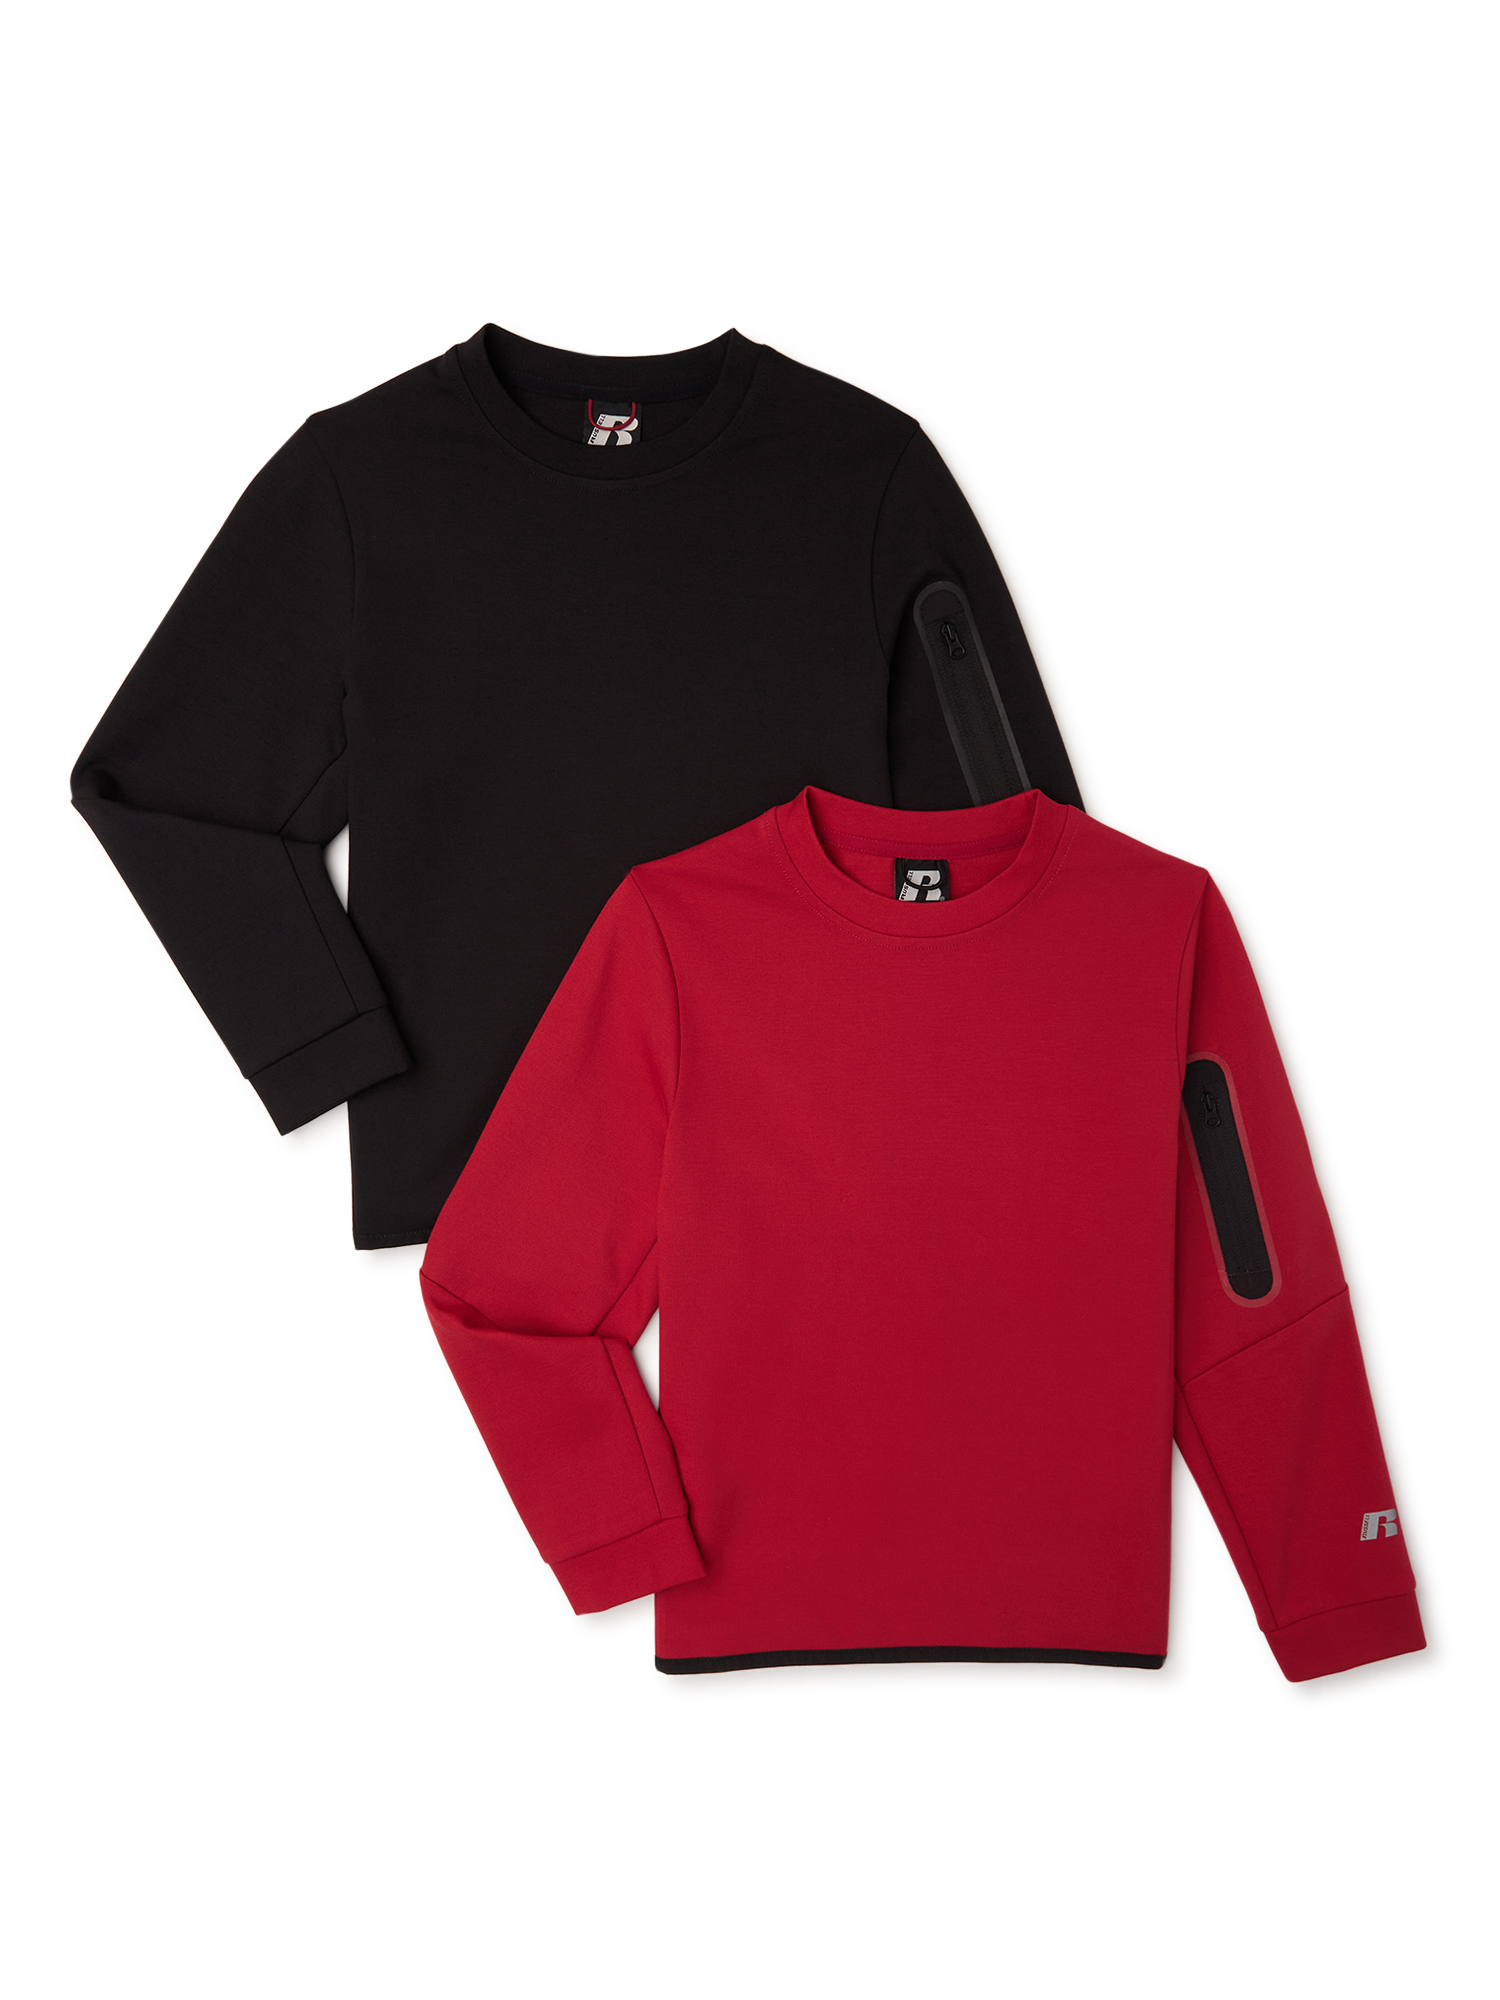 Russell Boys Long Sleeve Ponte 2-Pack Performance T-Shirt, Sizes 4-18 - image 1 of 3